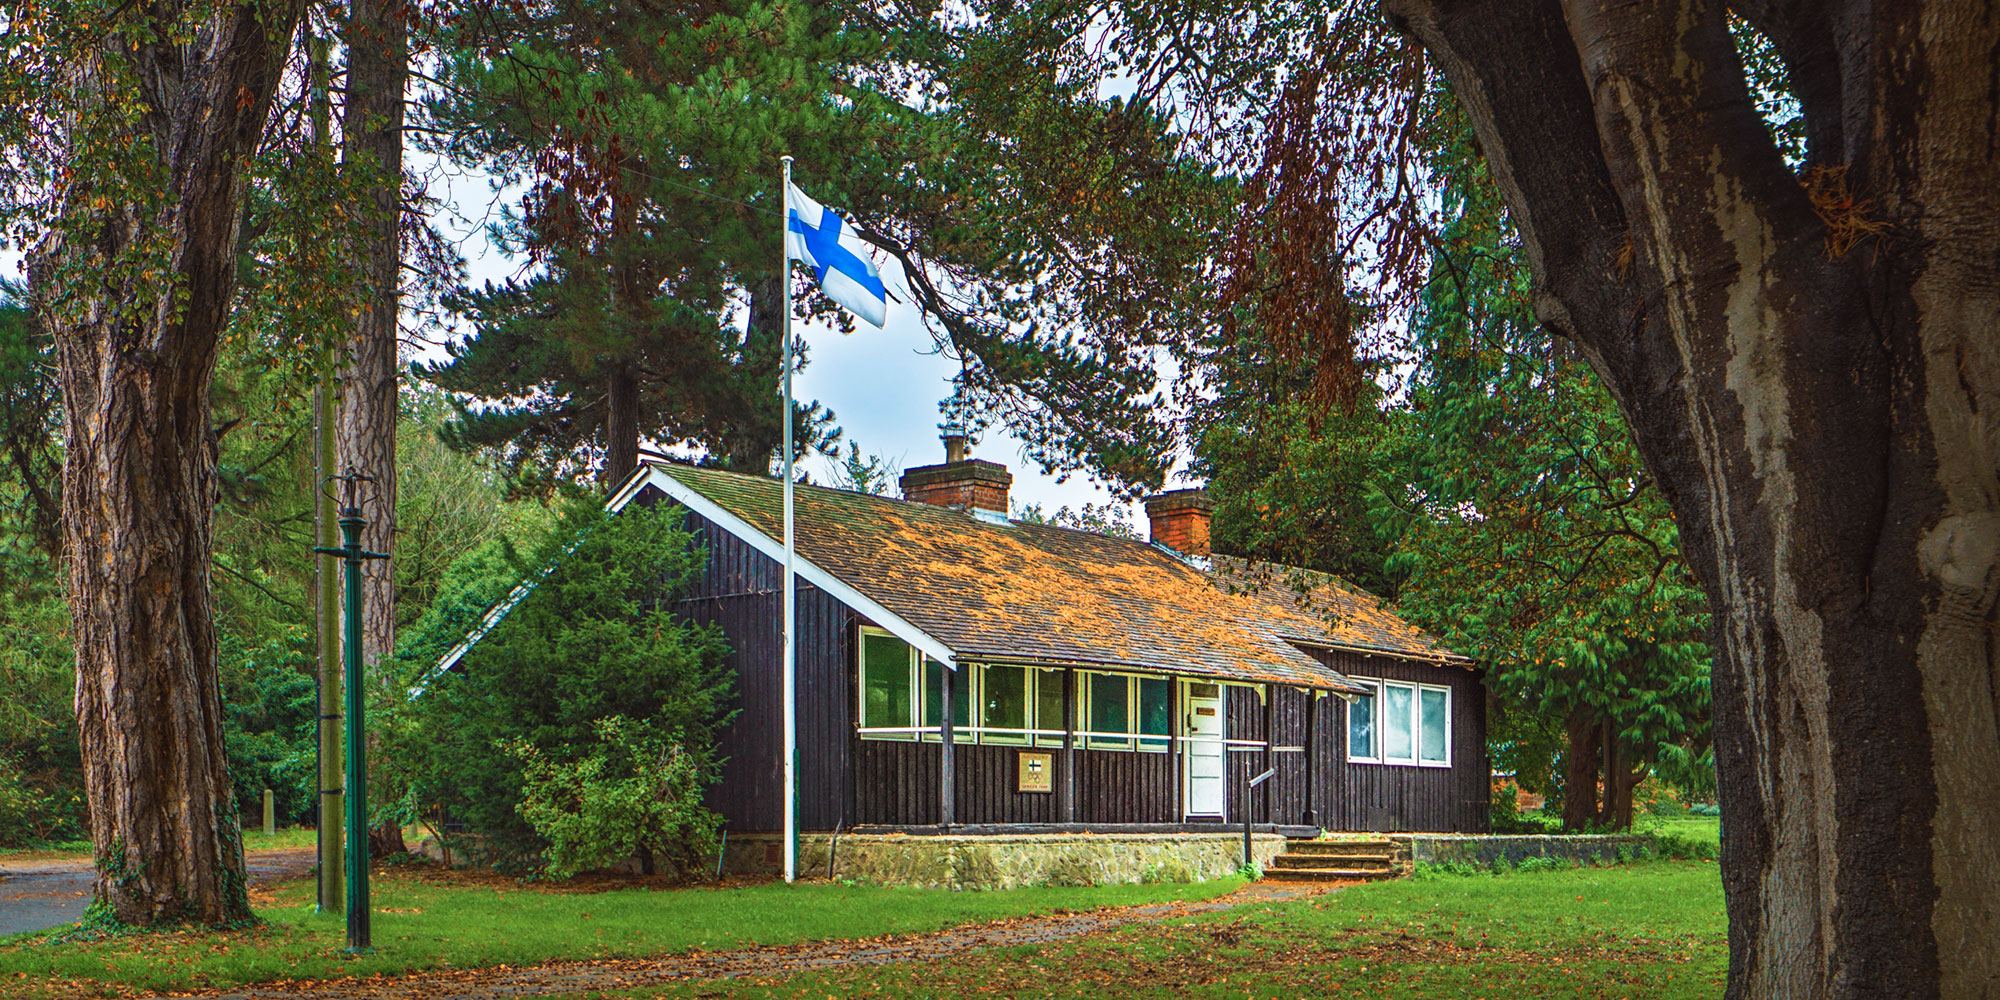 A low wooden building in parkland, with orange leaves on the roof and a Finnish flag flying in the foreground.